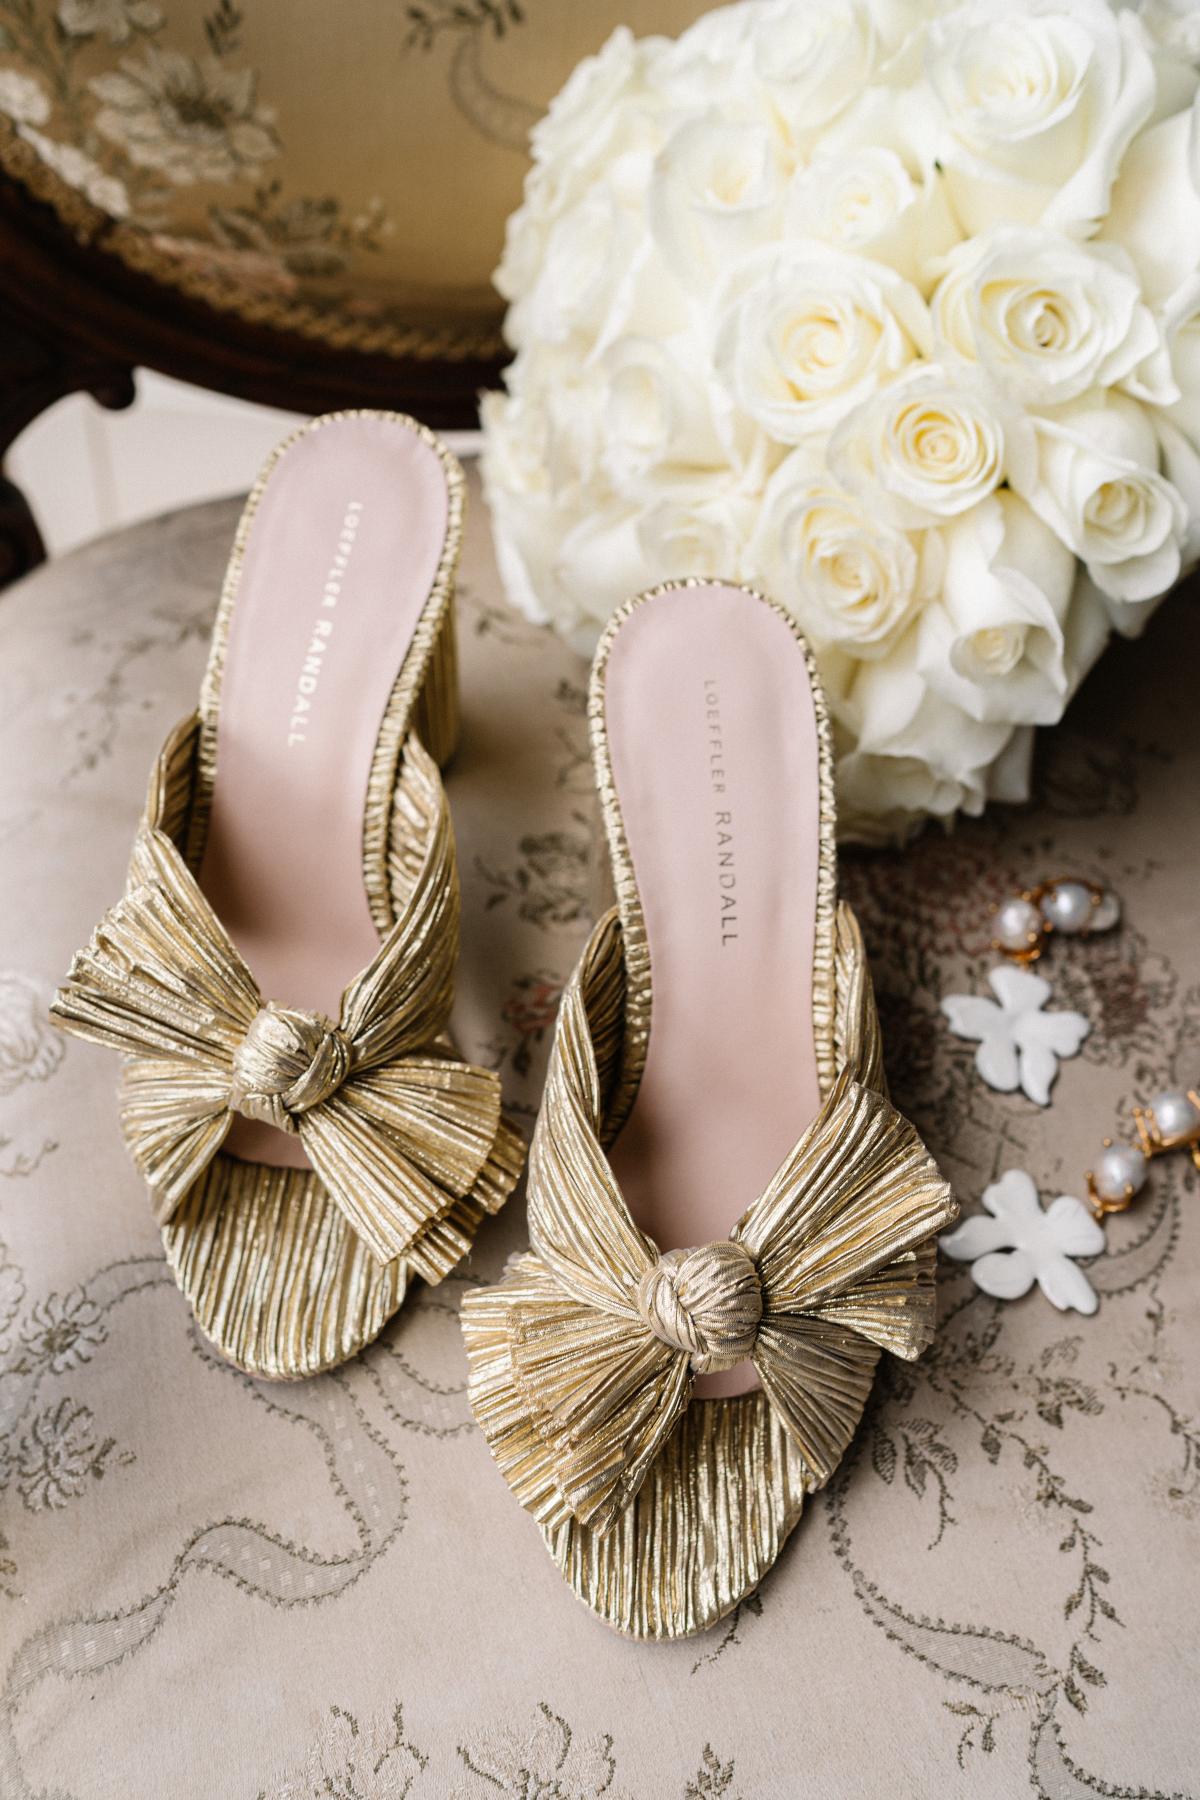 Real bride Maddi accessorises with unique old heels, statement white and gold earrings, and a white rose bouquet.